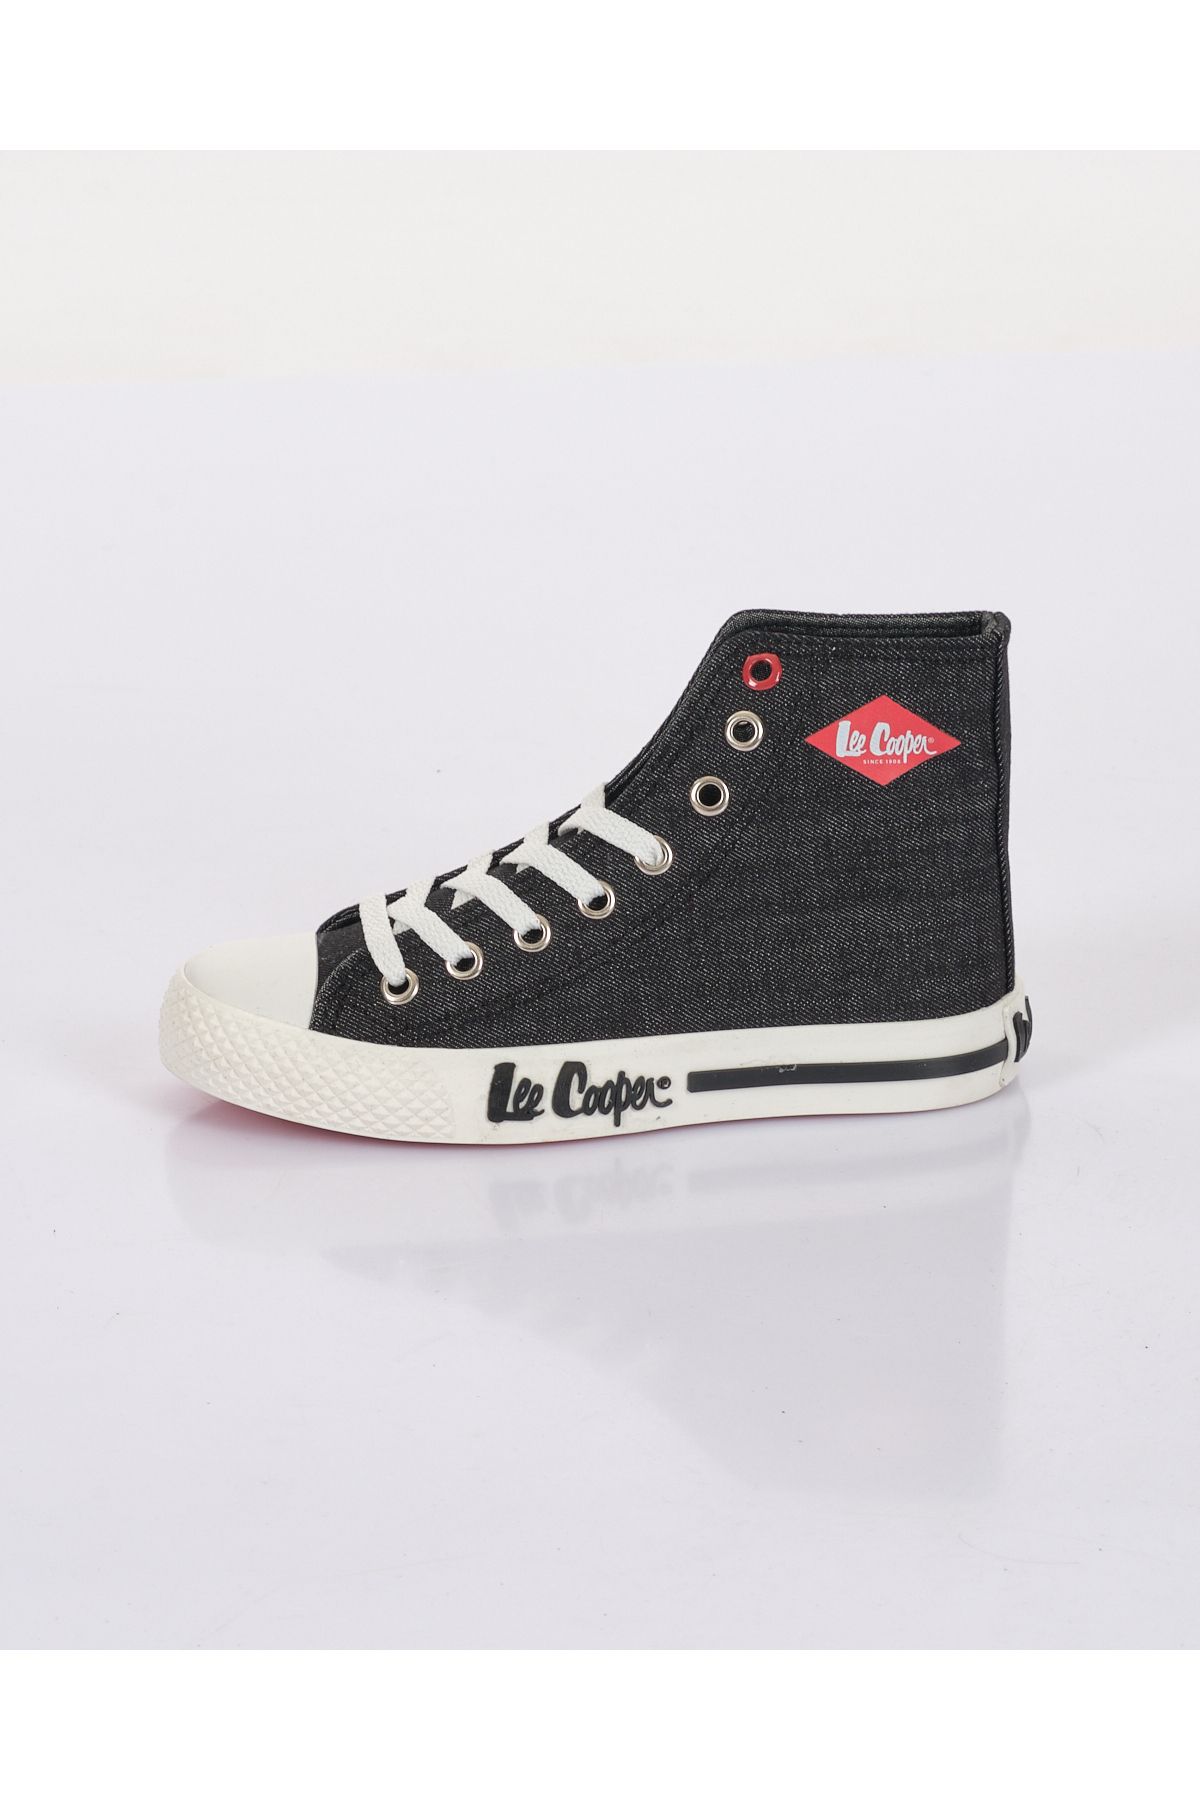 Buy Lee Cooper White Mens Lace Up Sneakers Online at Regal Shoes. | 9649382